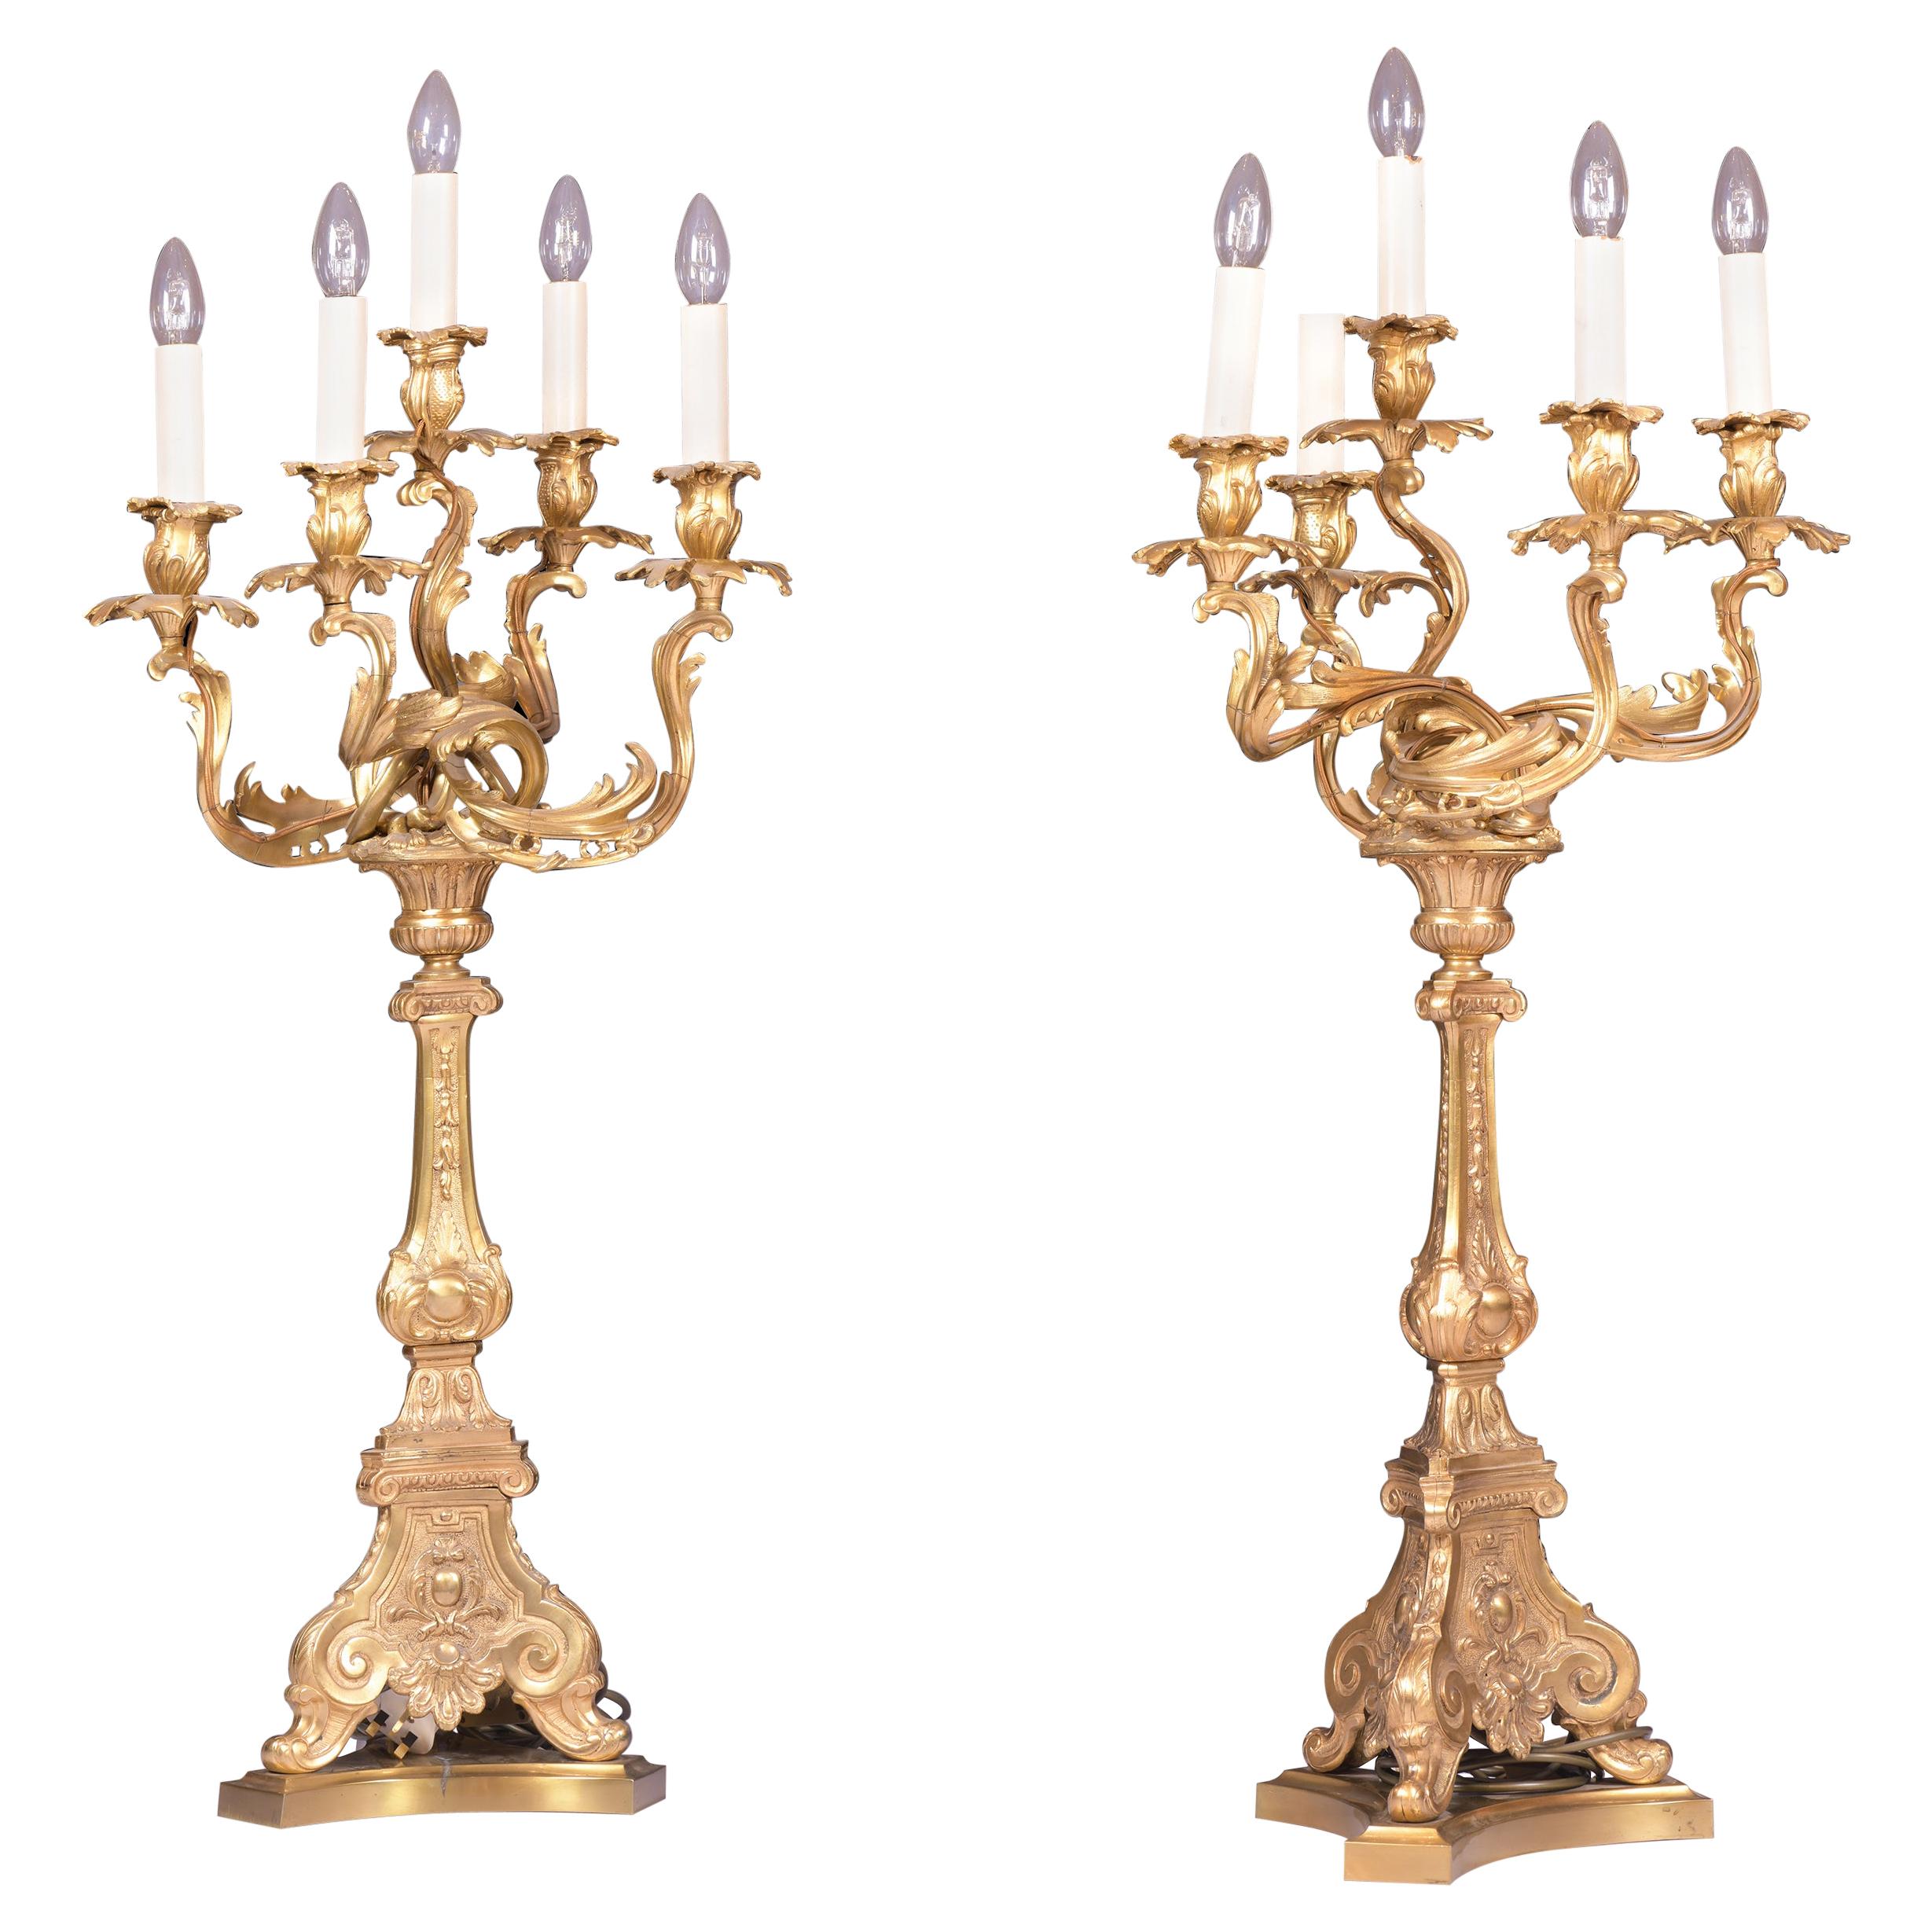 Pair of Late 19th Century French Ormolu Candelabra Lamps in the Louis XV Style